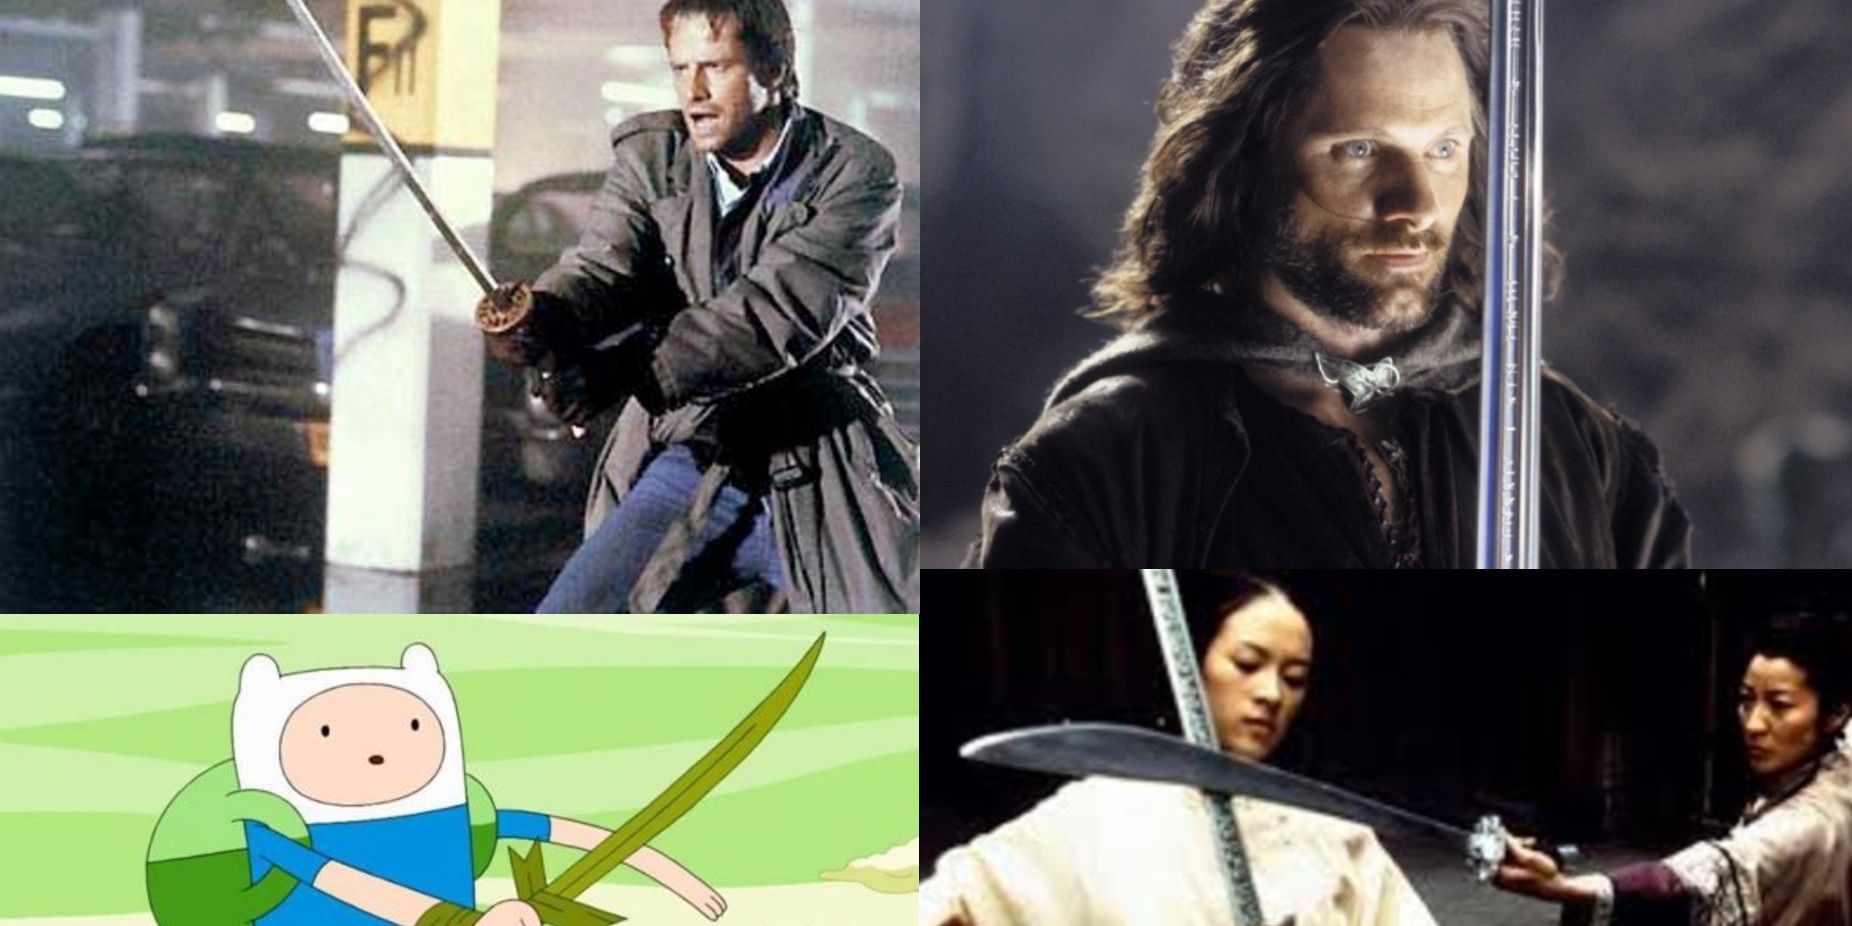 10 Coolest Swords In Film & Television Ranked